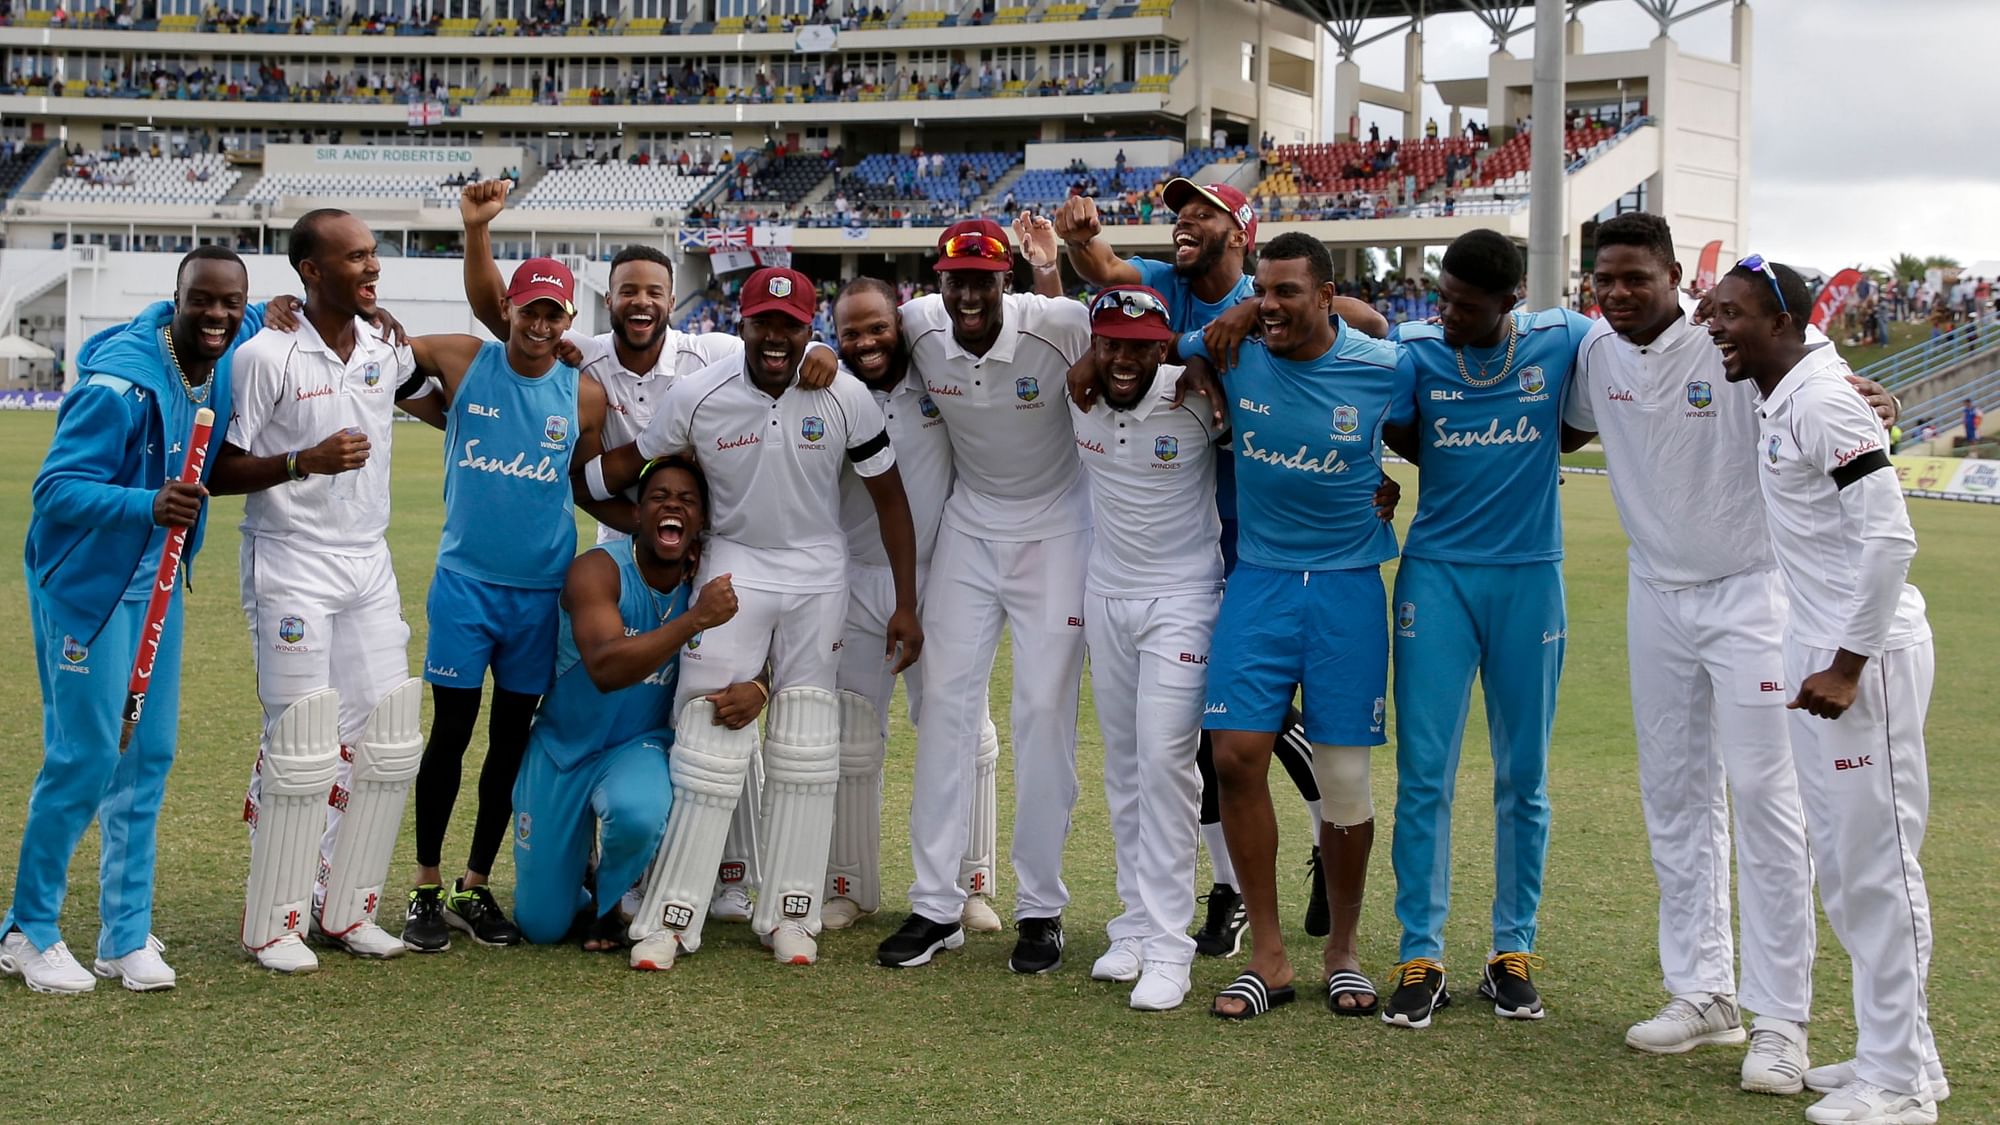 West Indies players celebrate beating England by ten wickets on day three of the second Test cricket match at the Sir Vivian Richards Stadium in North Sound, Antigua and Barbuda, Saturday, Feb. 2, 2019.&nbsp;